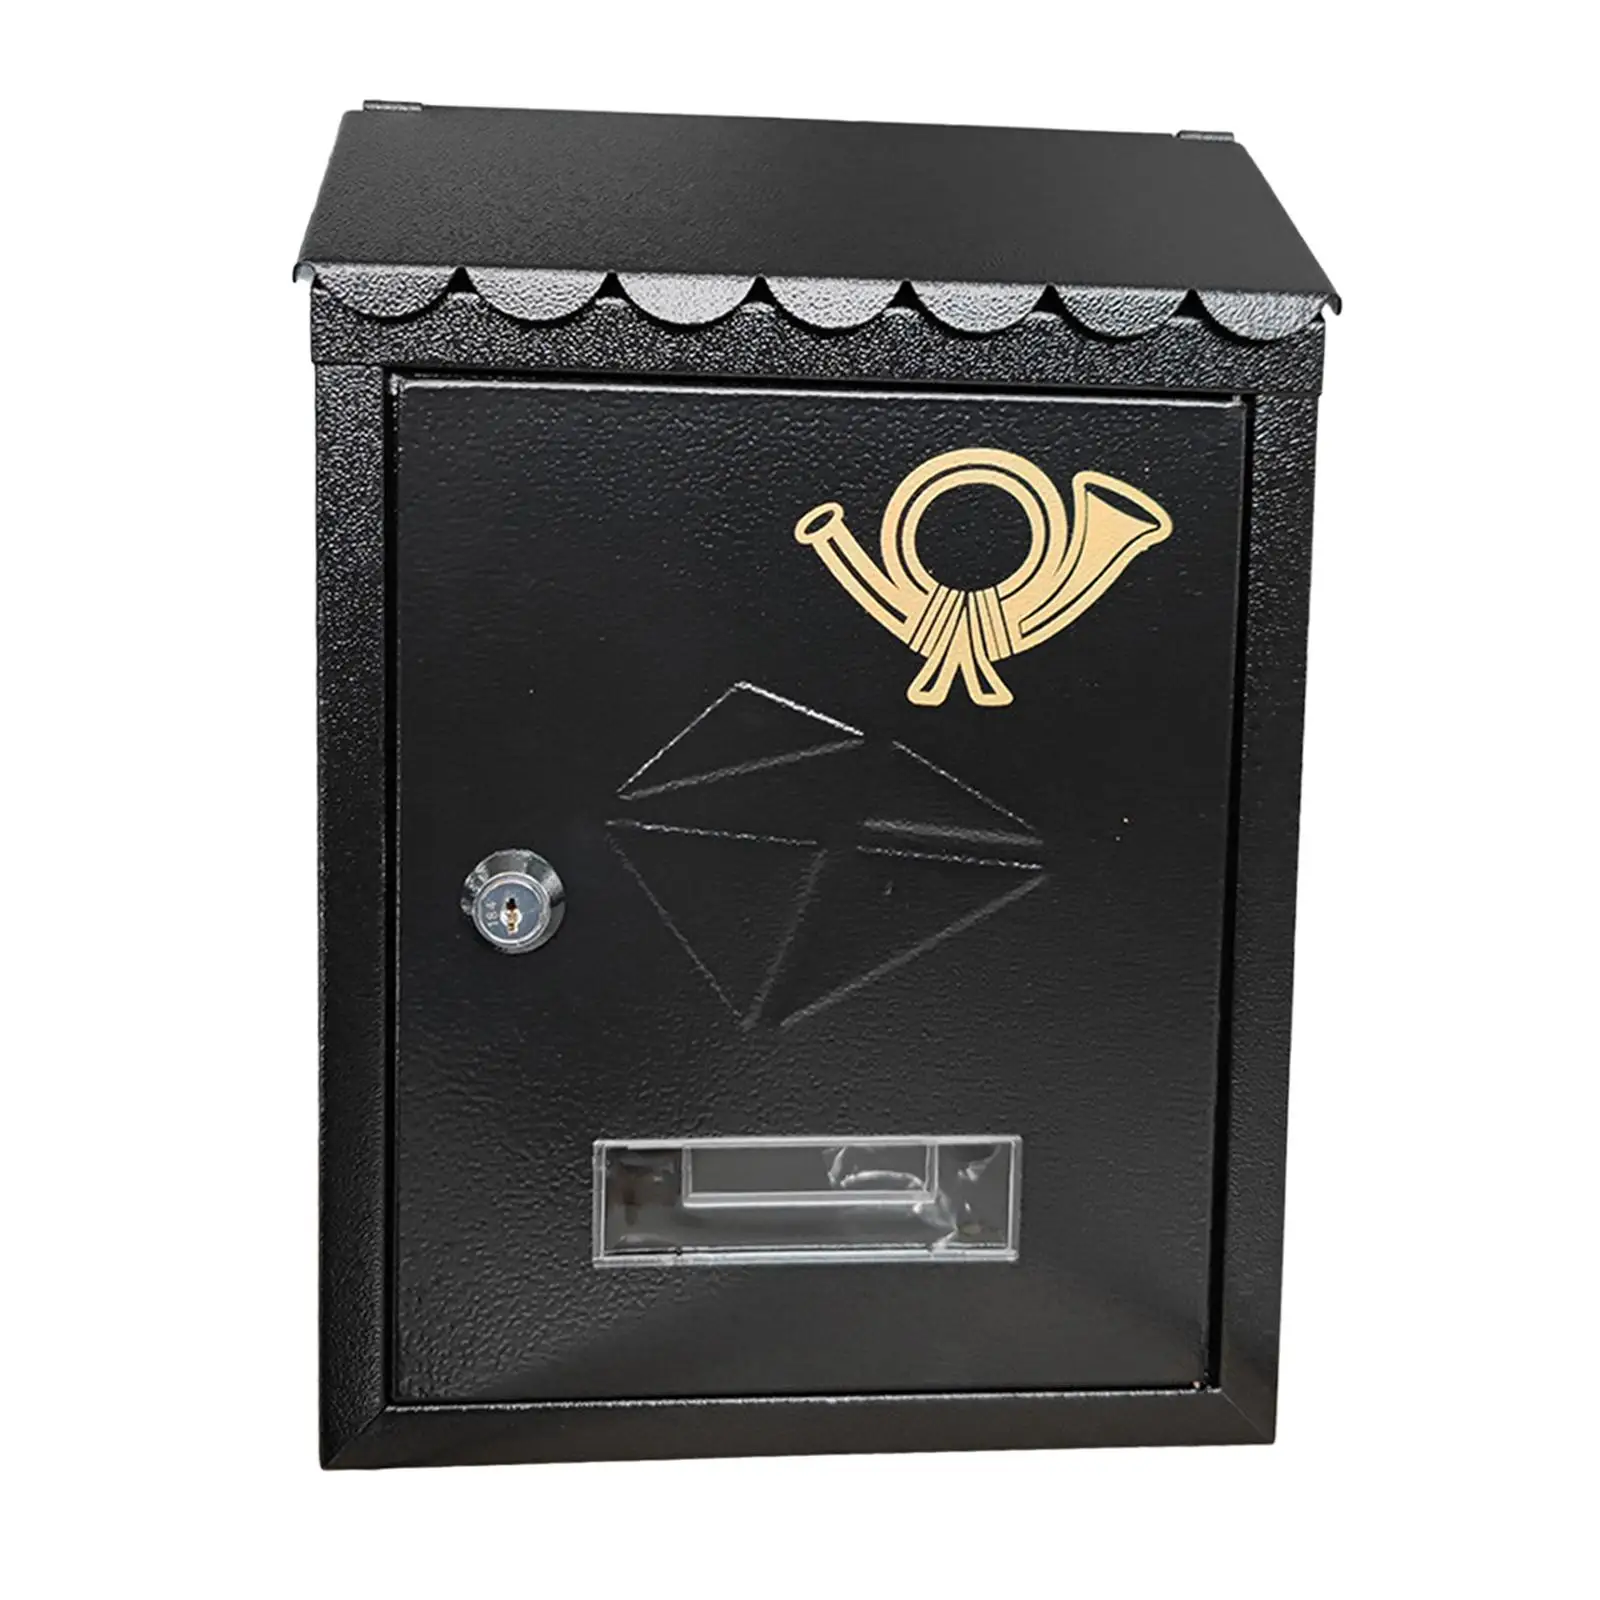 Wall Mount Mailbox Office Locking Mailbox with Key Outdoor Business Drop Box